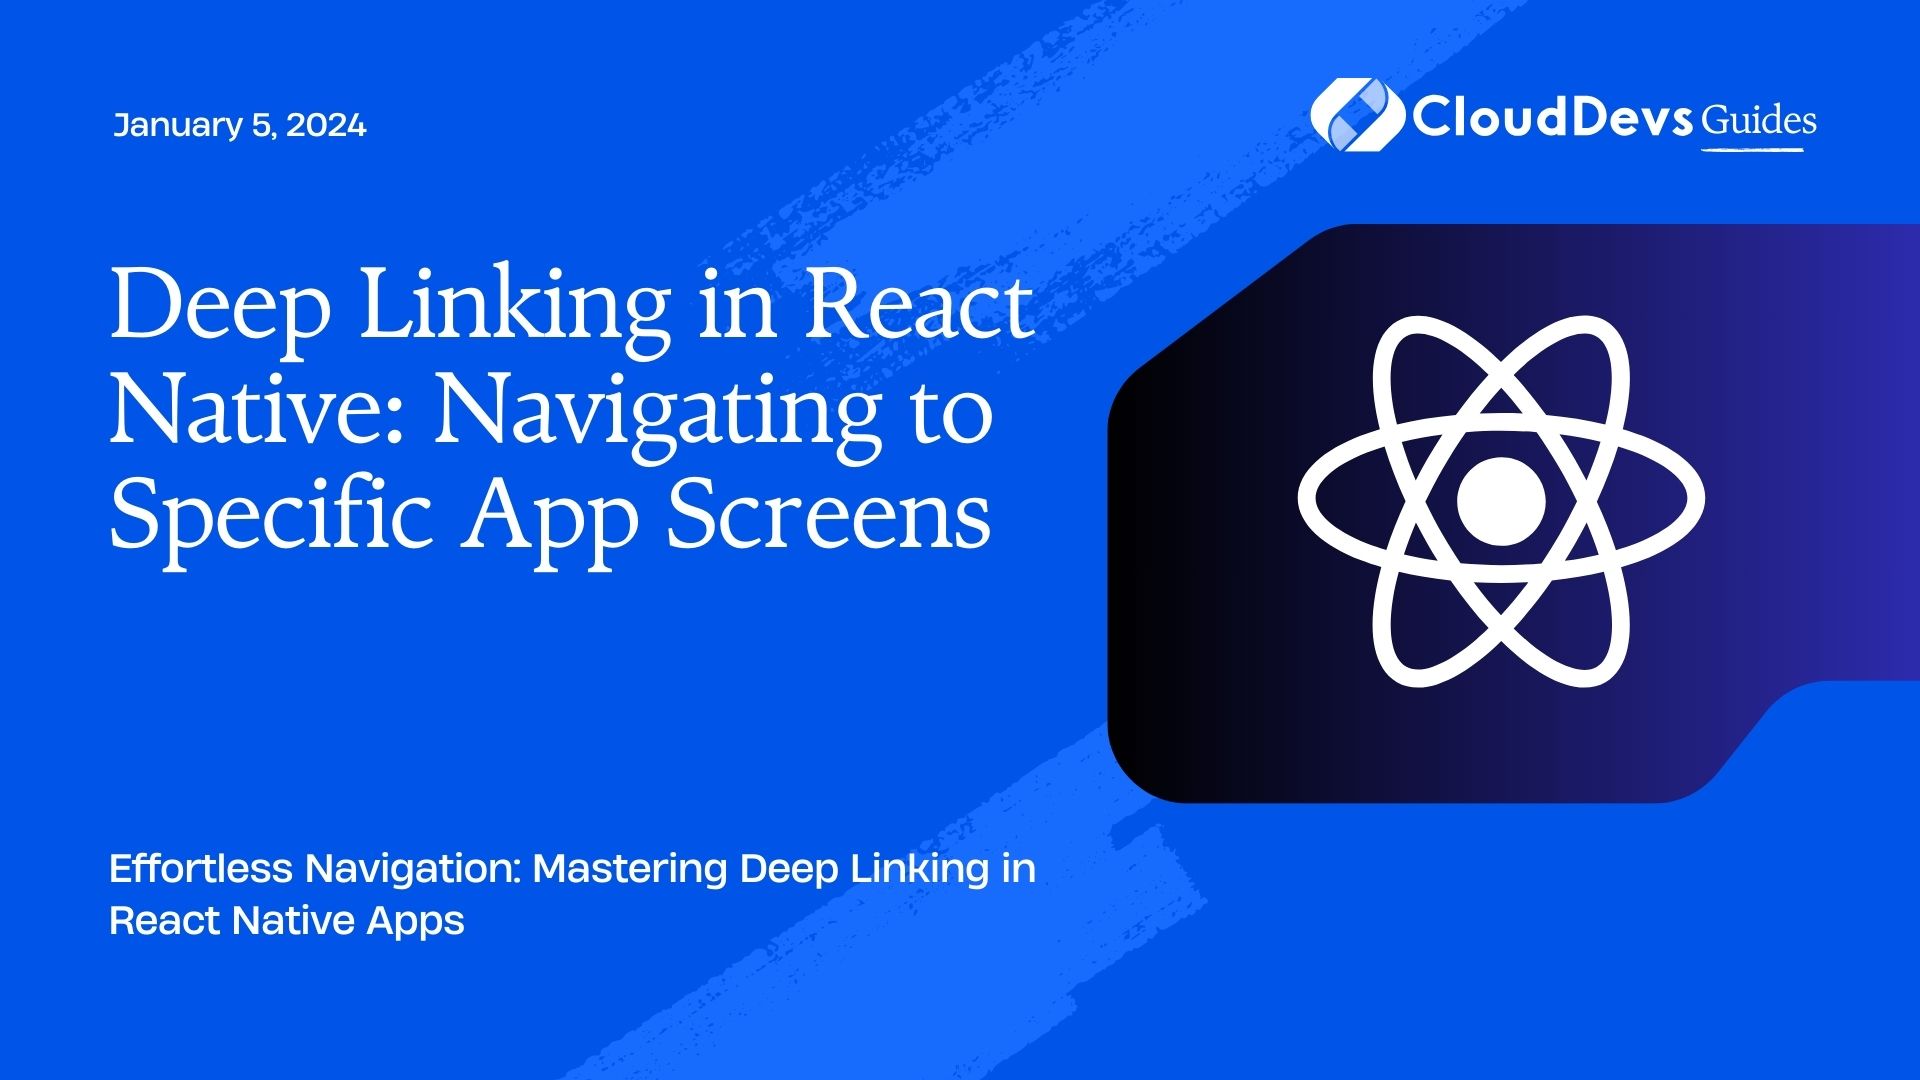 Deep Linking in React Native: Navigating to Specific App Screens